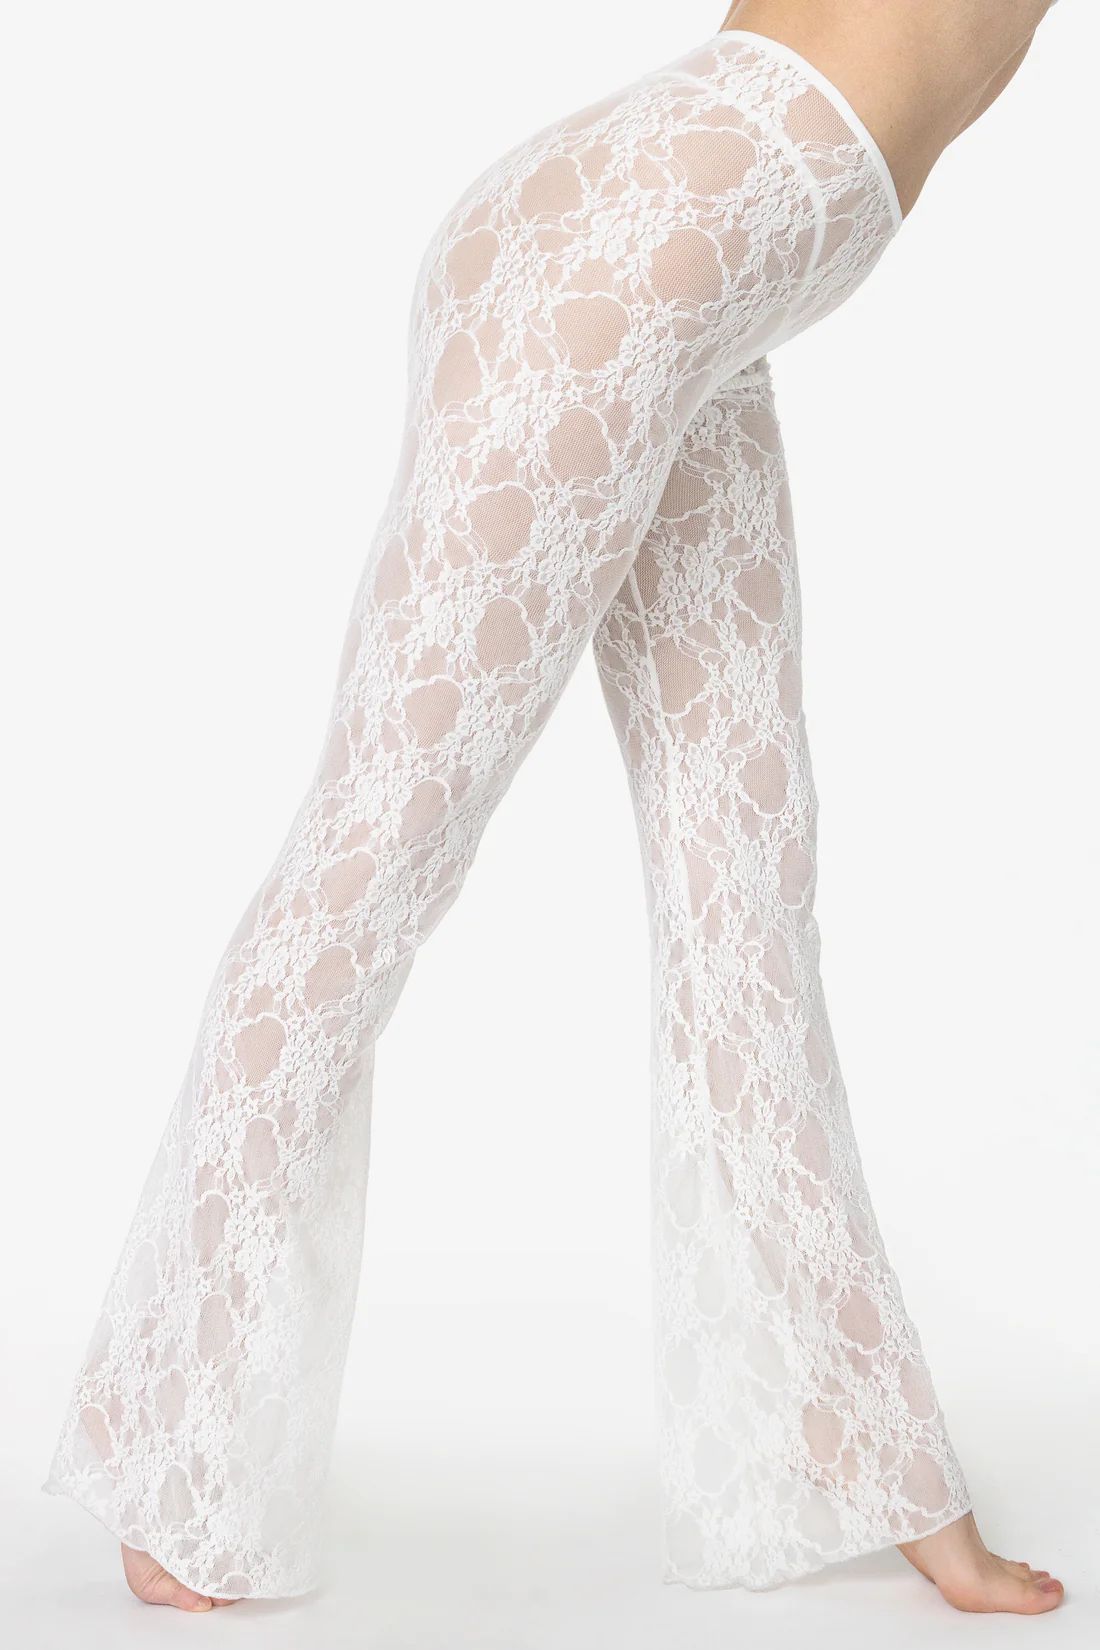 FNS300 - Floral Lace Flare Leggings | Los Angeles Apparel